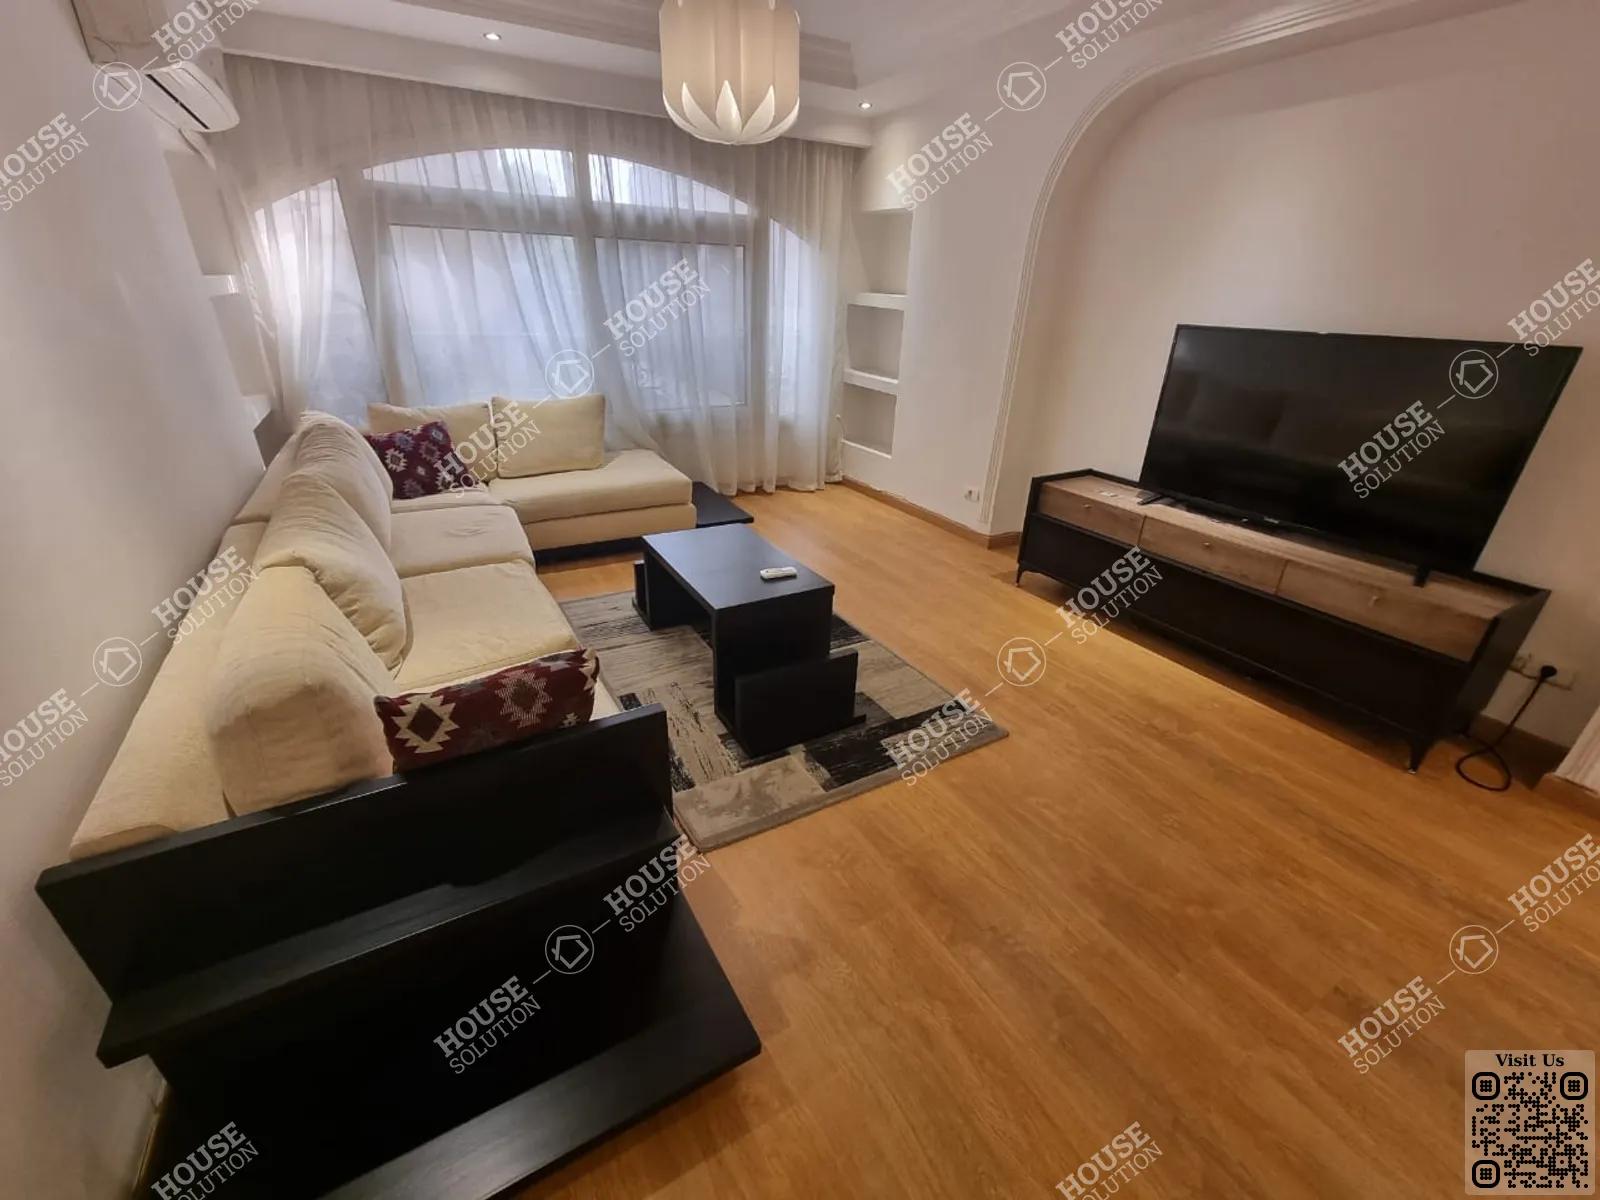 LIVING AREA  @ Apartments For Rent In Maadi Maadi Sarayat Area: 320 m² consists of 4 Bedrooms 4 Bathrooms Modern furnished 5 stars #5628-2